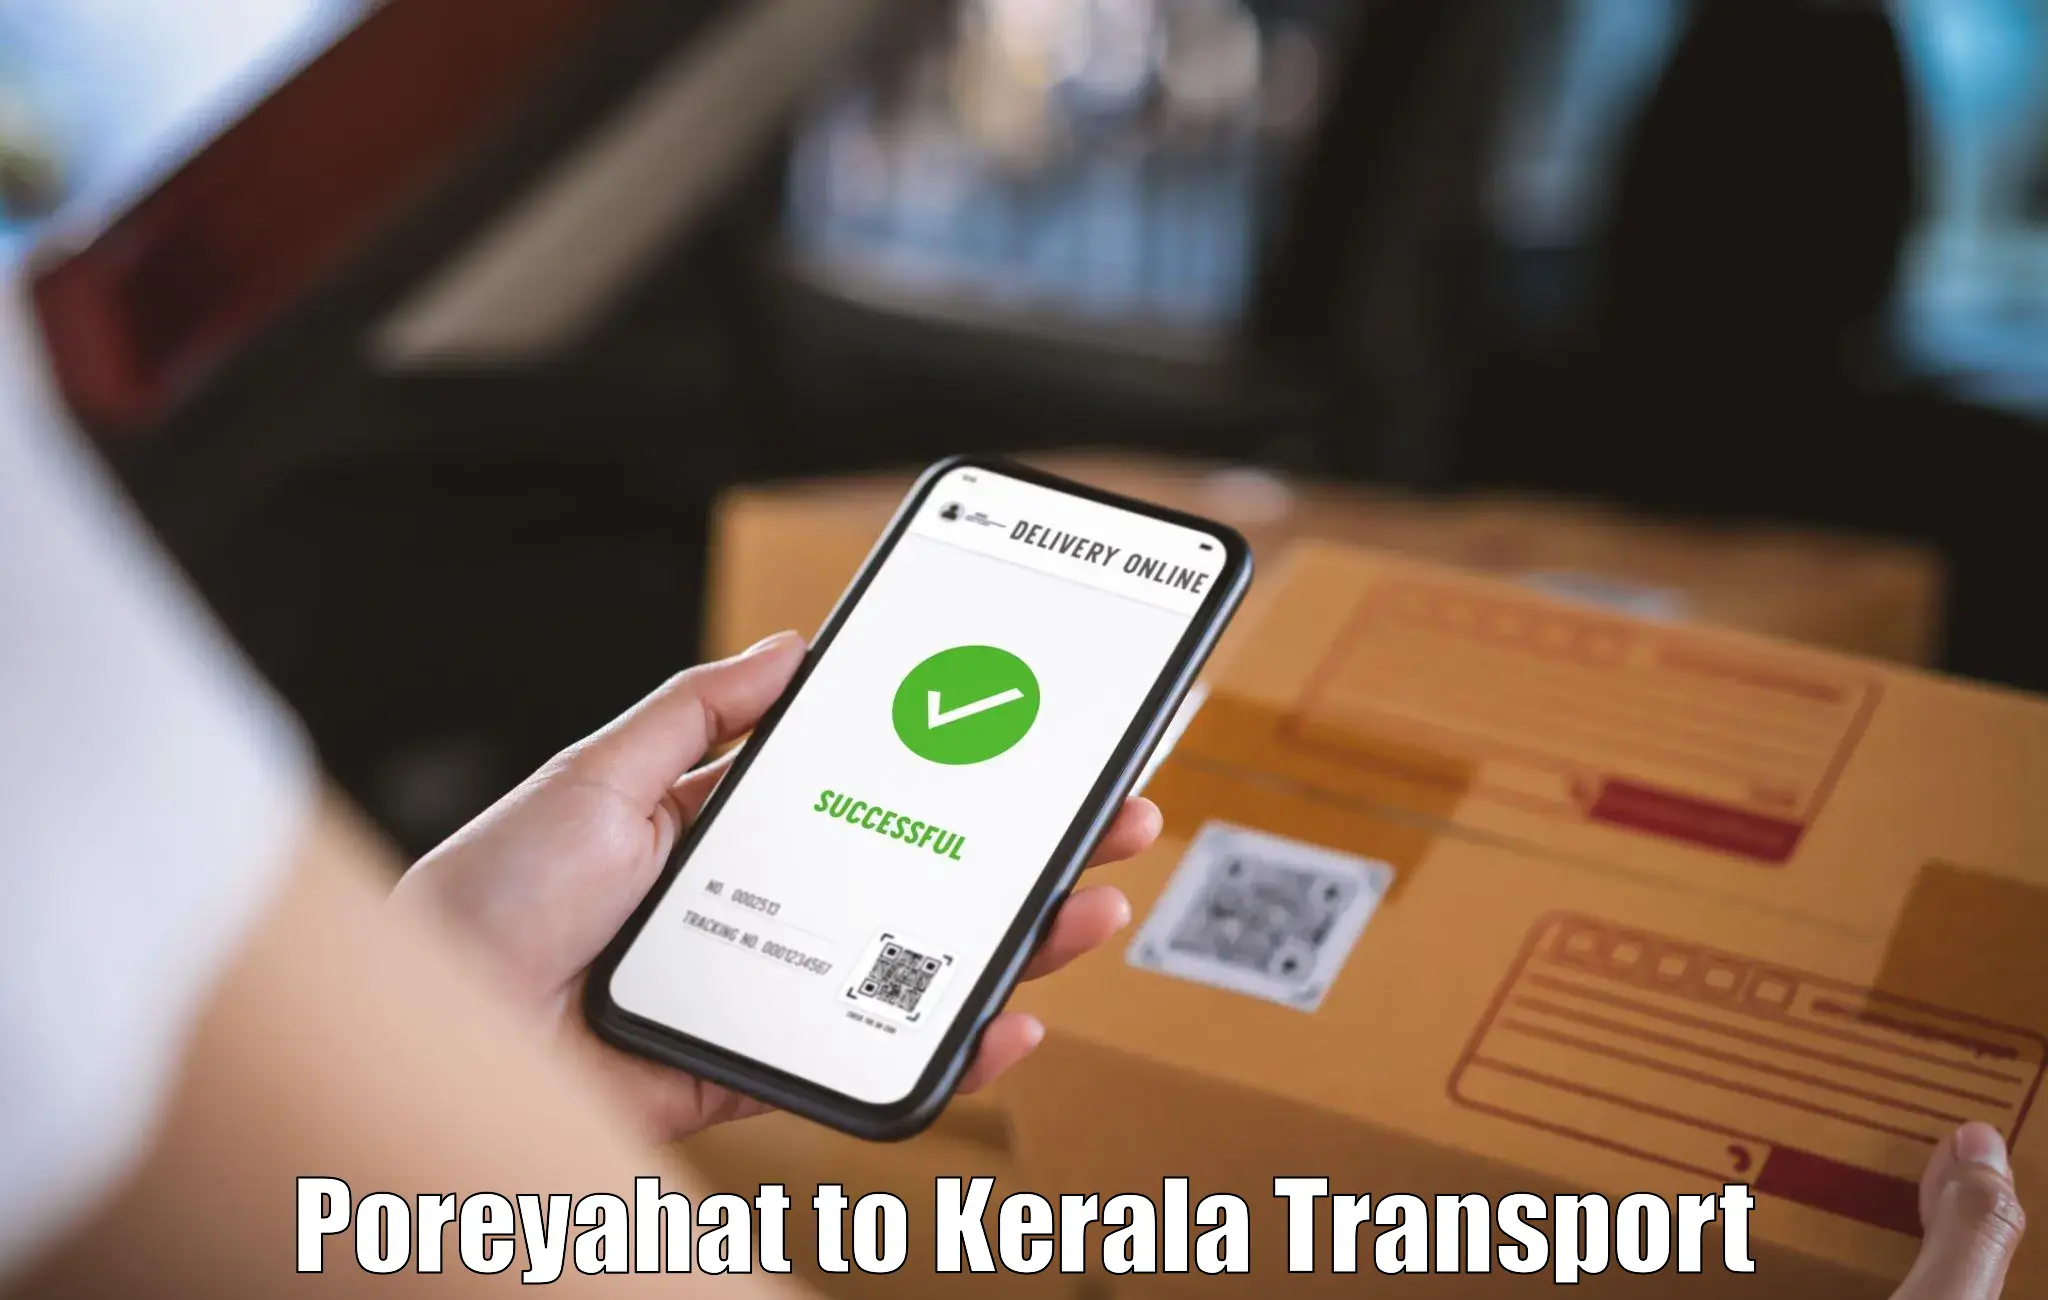 Commercial transport service Poreyahat to Anjumoorthy